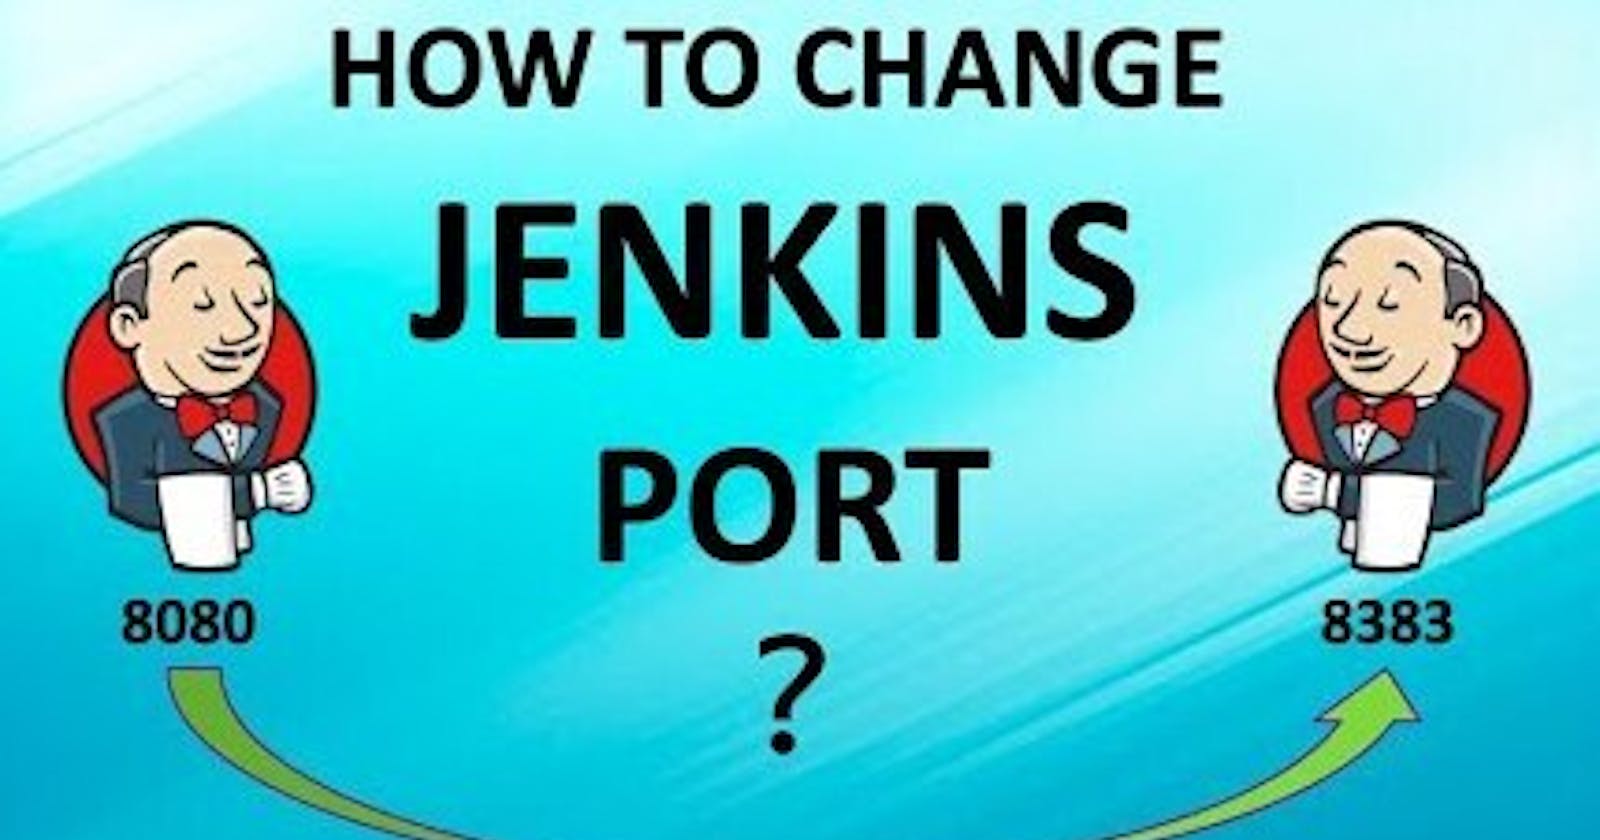 How to change Jenkins ports from default 8080 to {any port} in Linux.